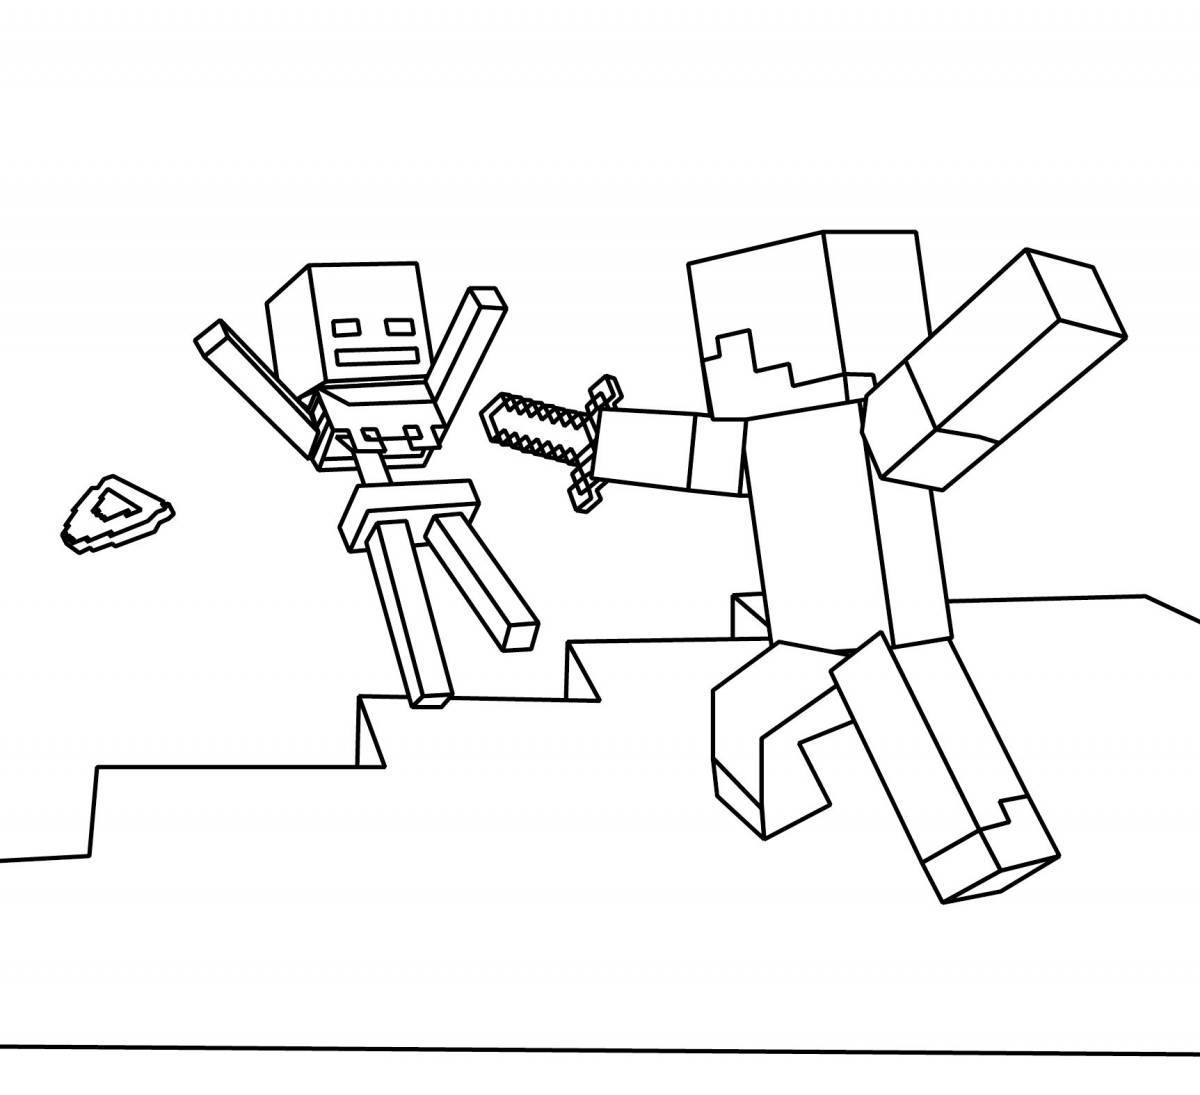 Steve's animated coloring page